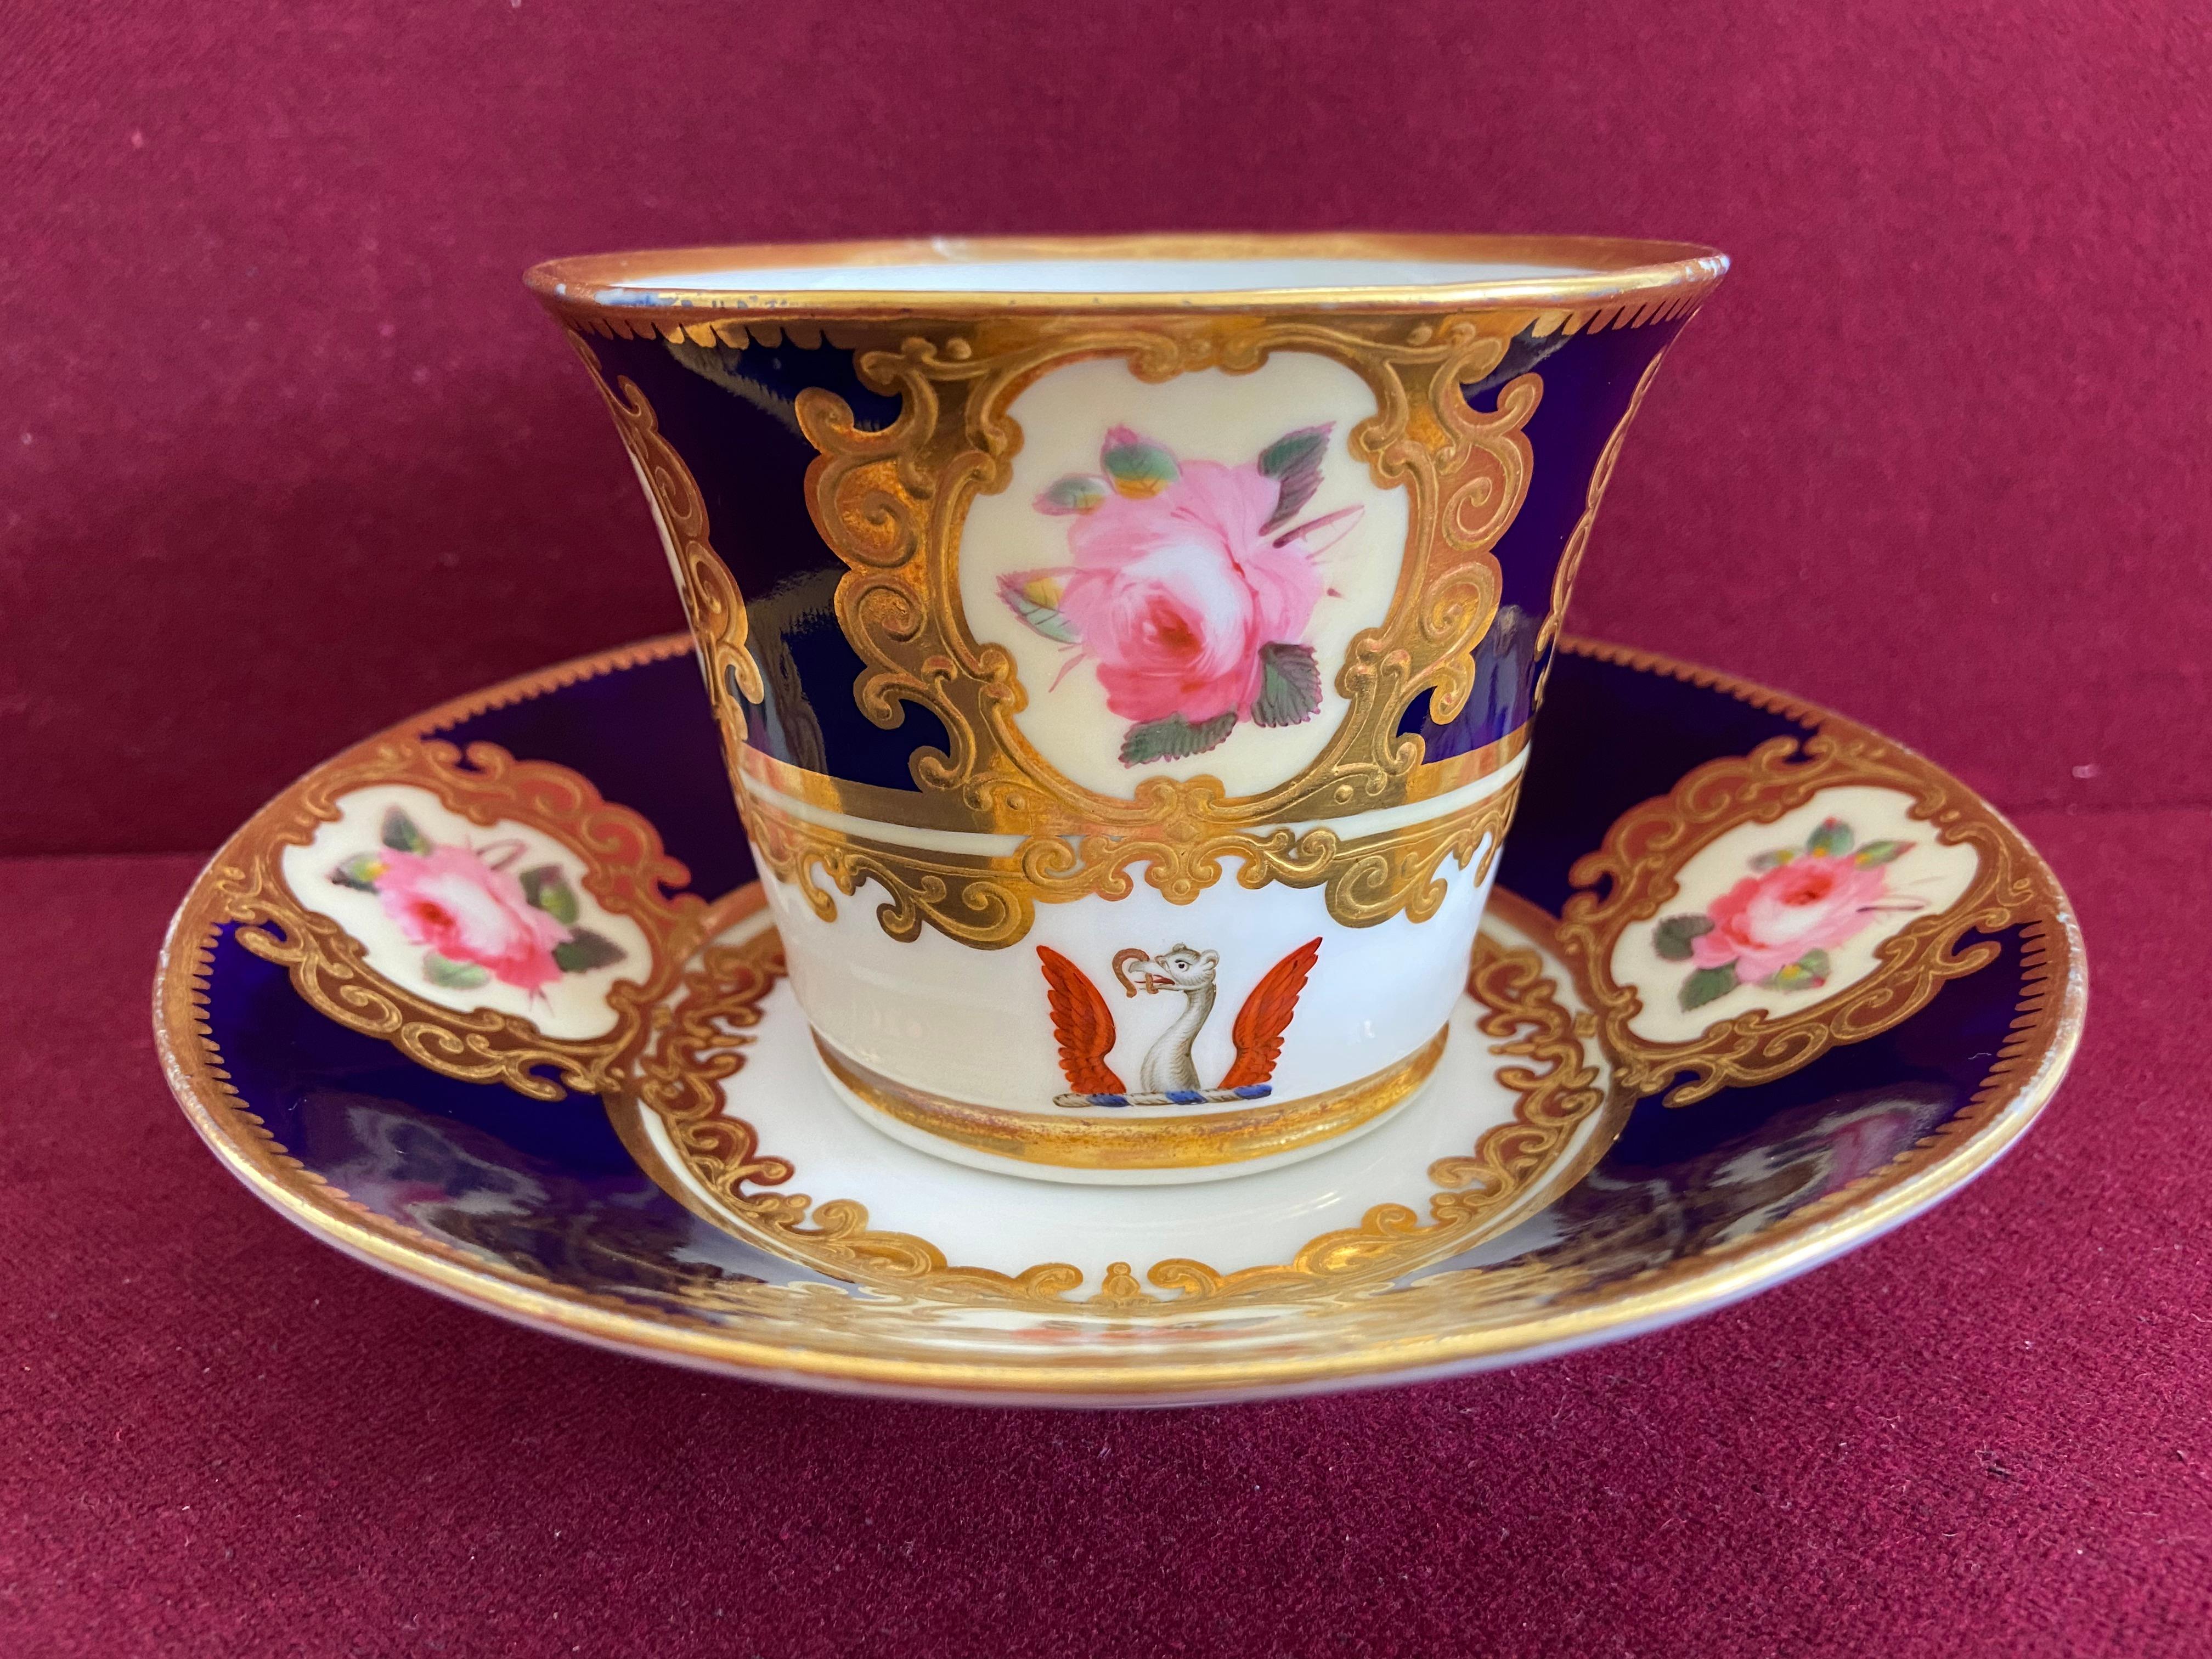 19th Century A Chamberlain Worcester Sir John Hullock Breakfast Cup & Saucer For Sale